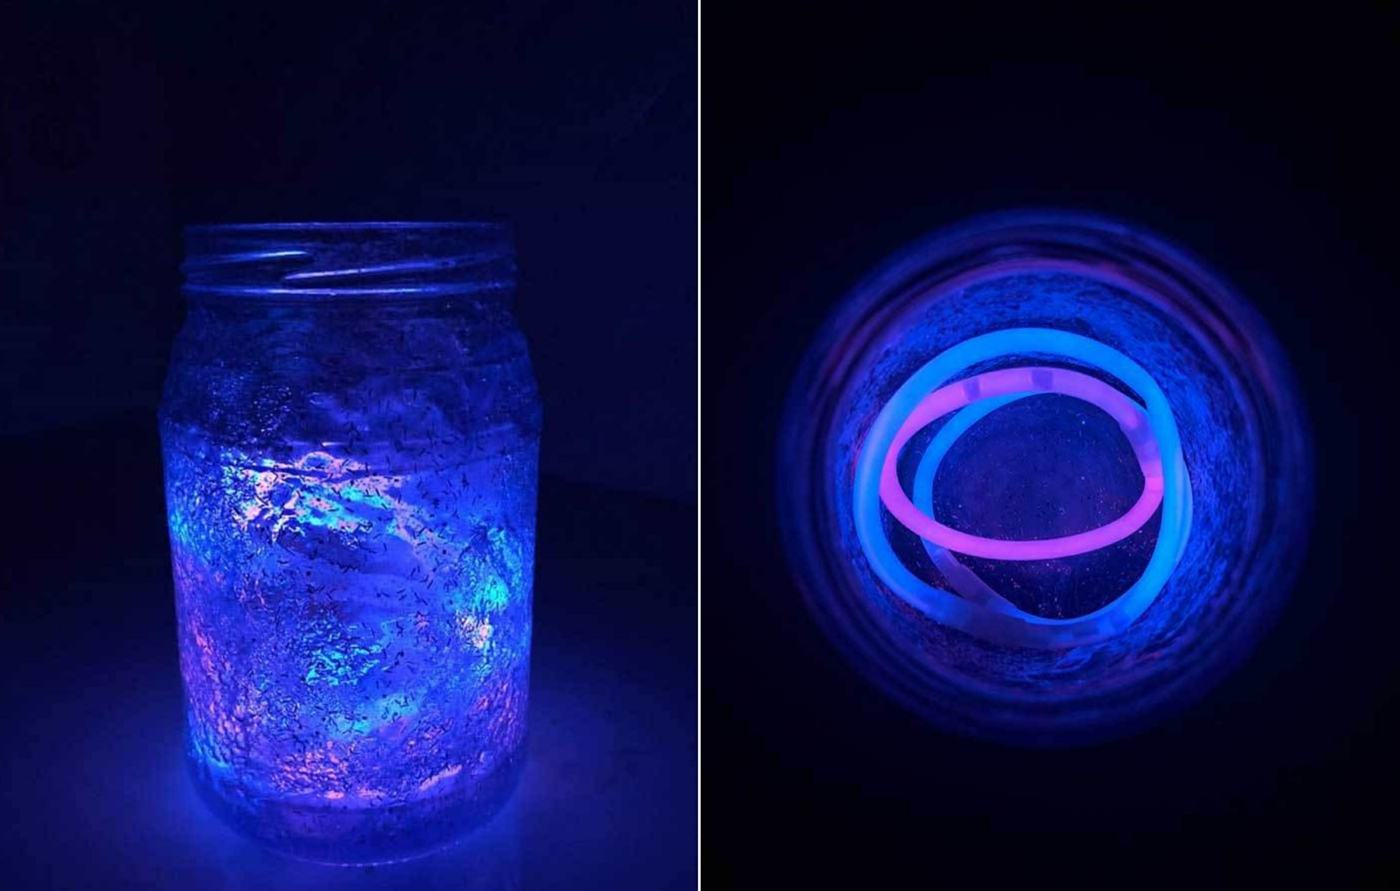 Universe in glass made of glitter glue and with candlelight